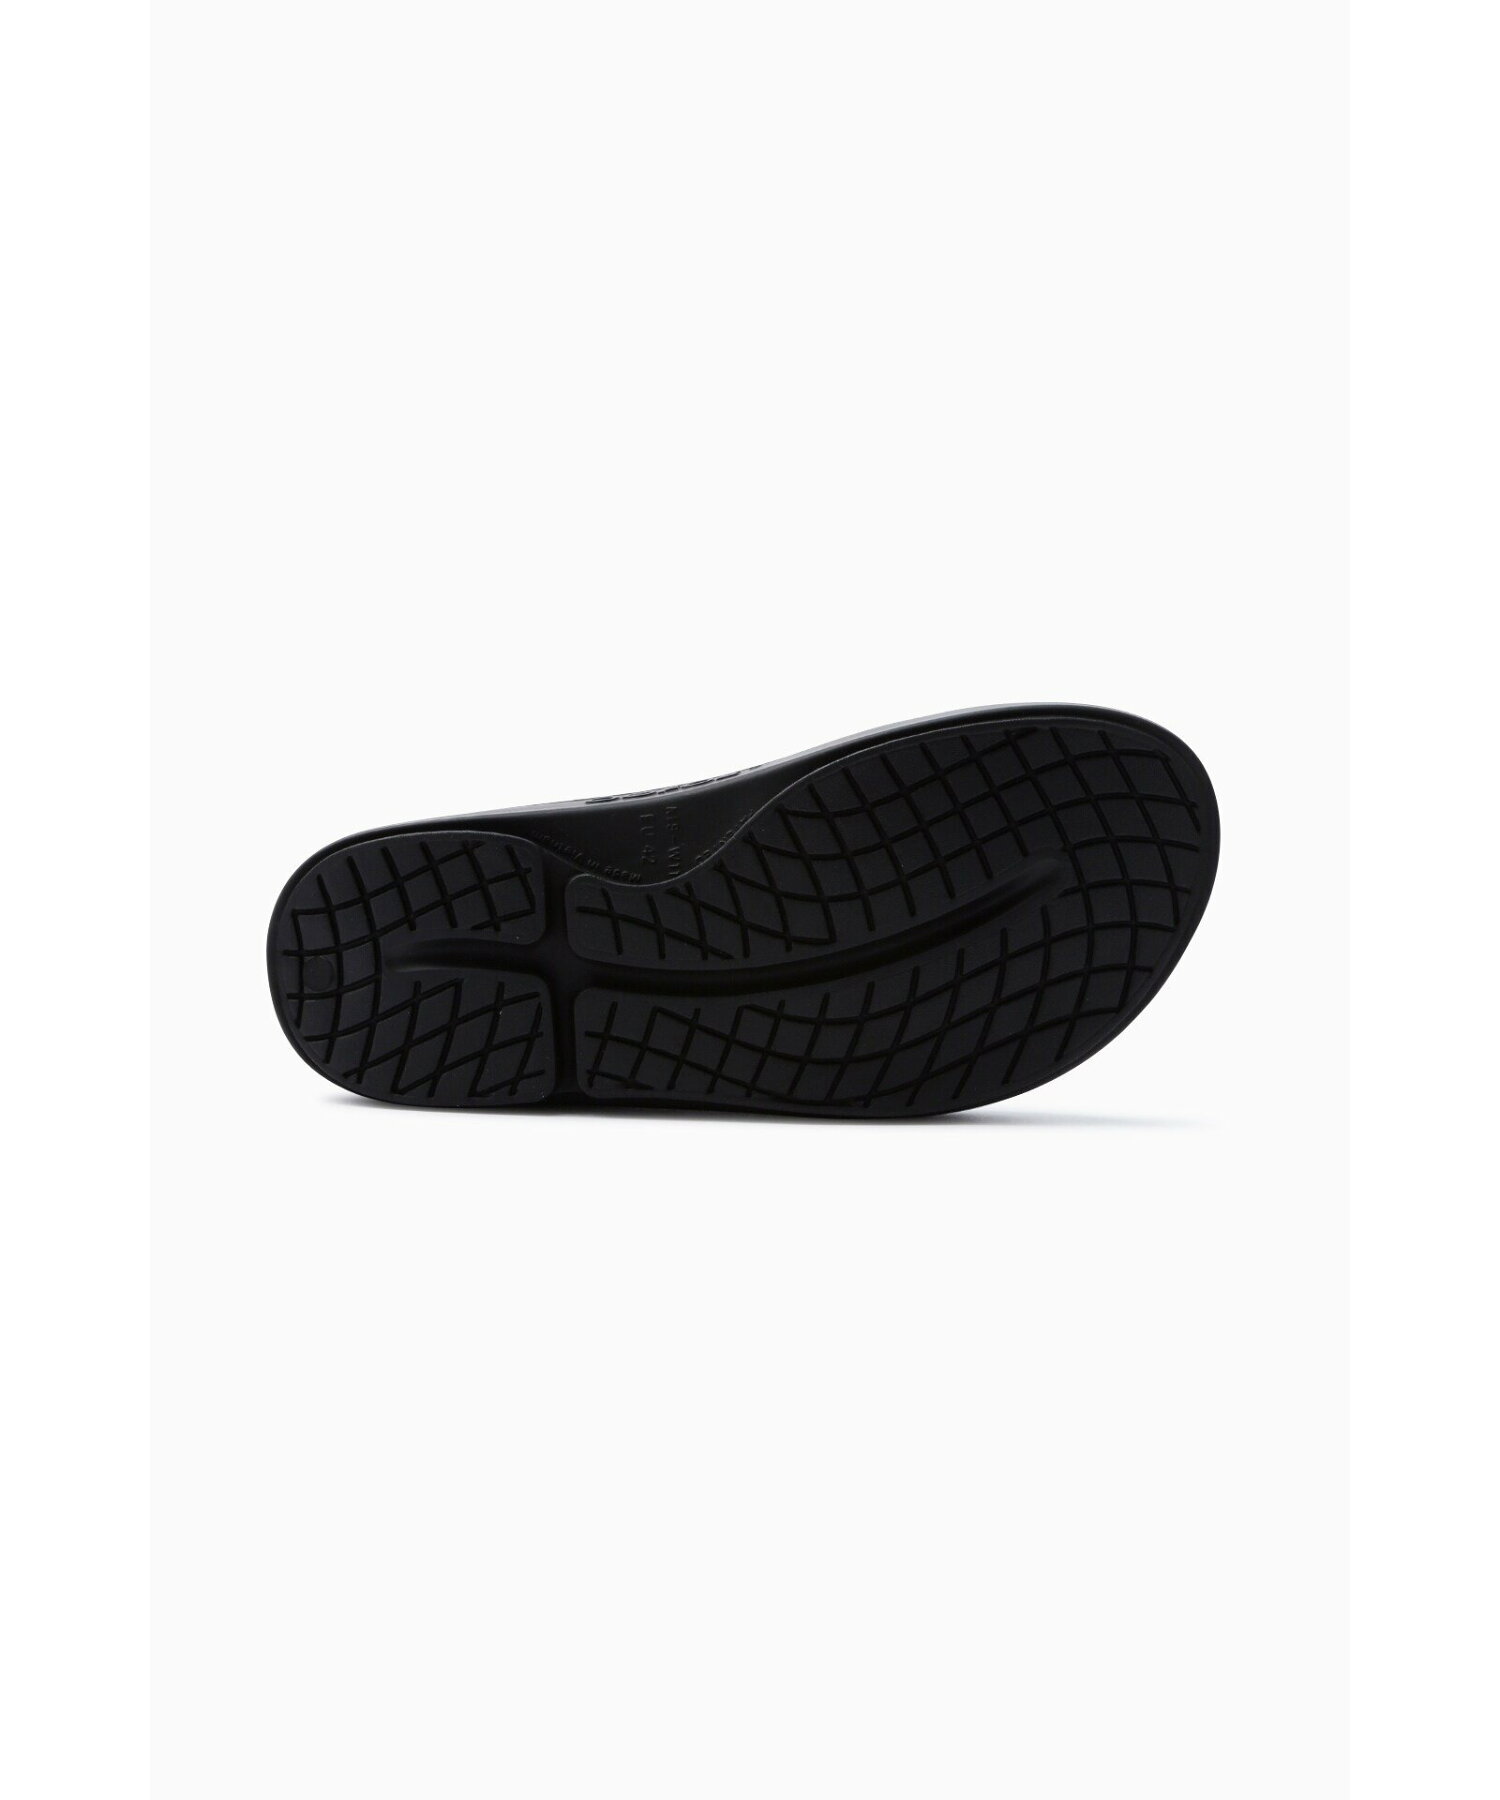 OOFOS original * and wander recovery sandal